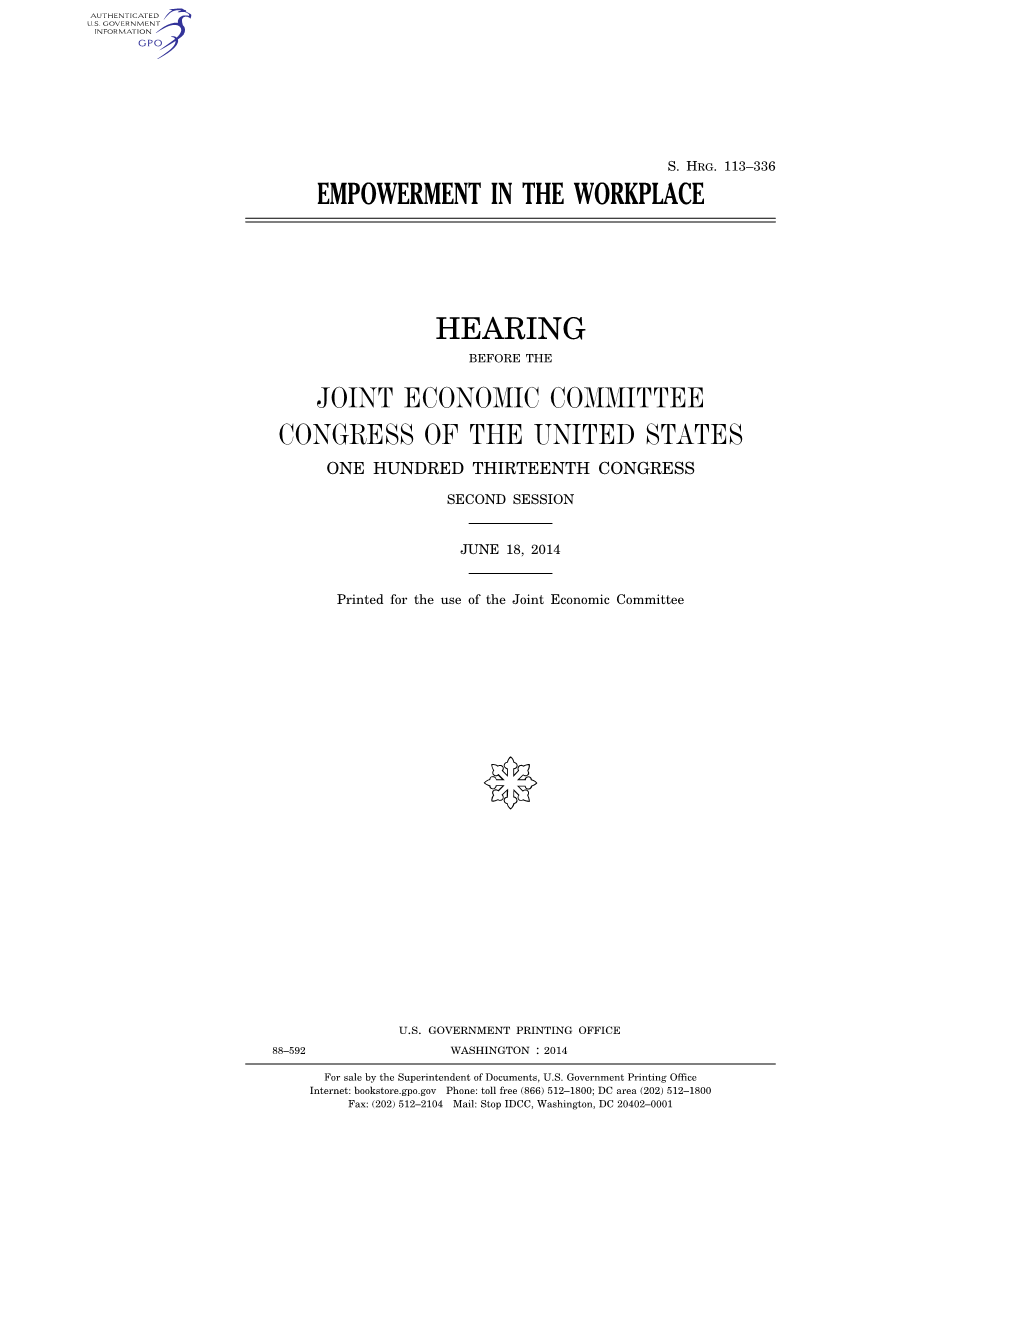 Empowerment in the Workplace Hearing Joint Economic Committee Congress of the United States